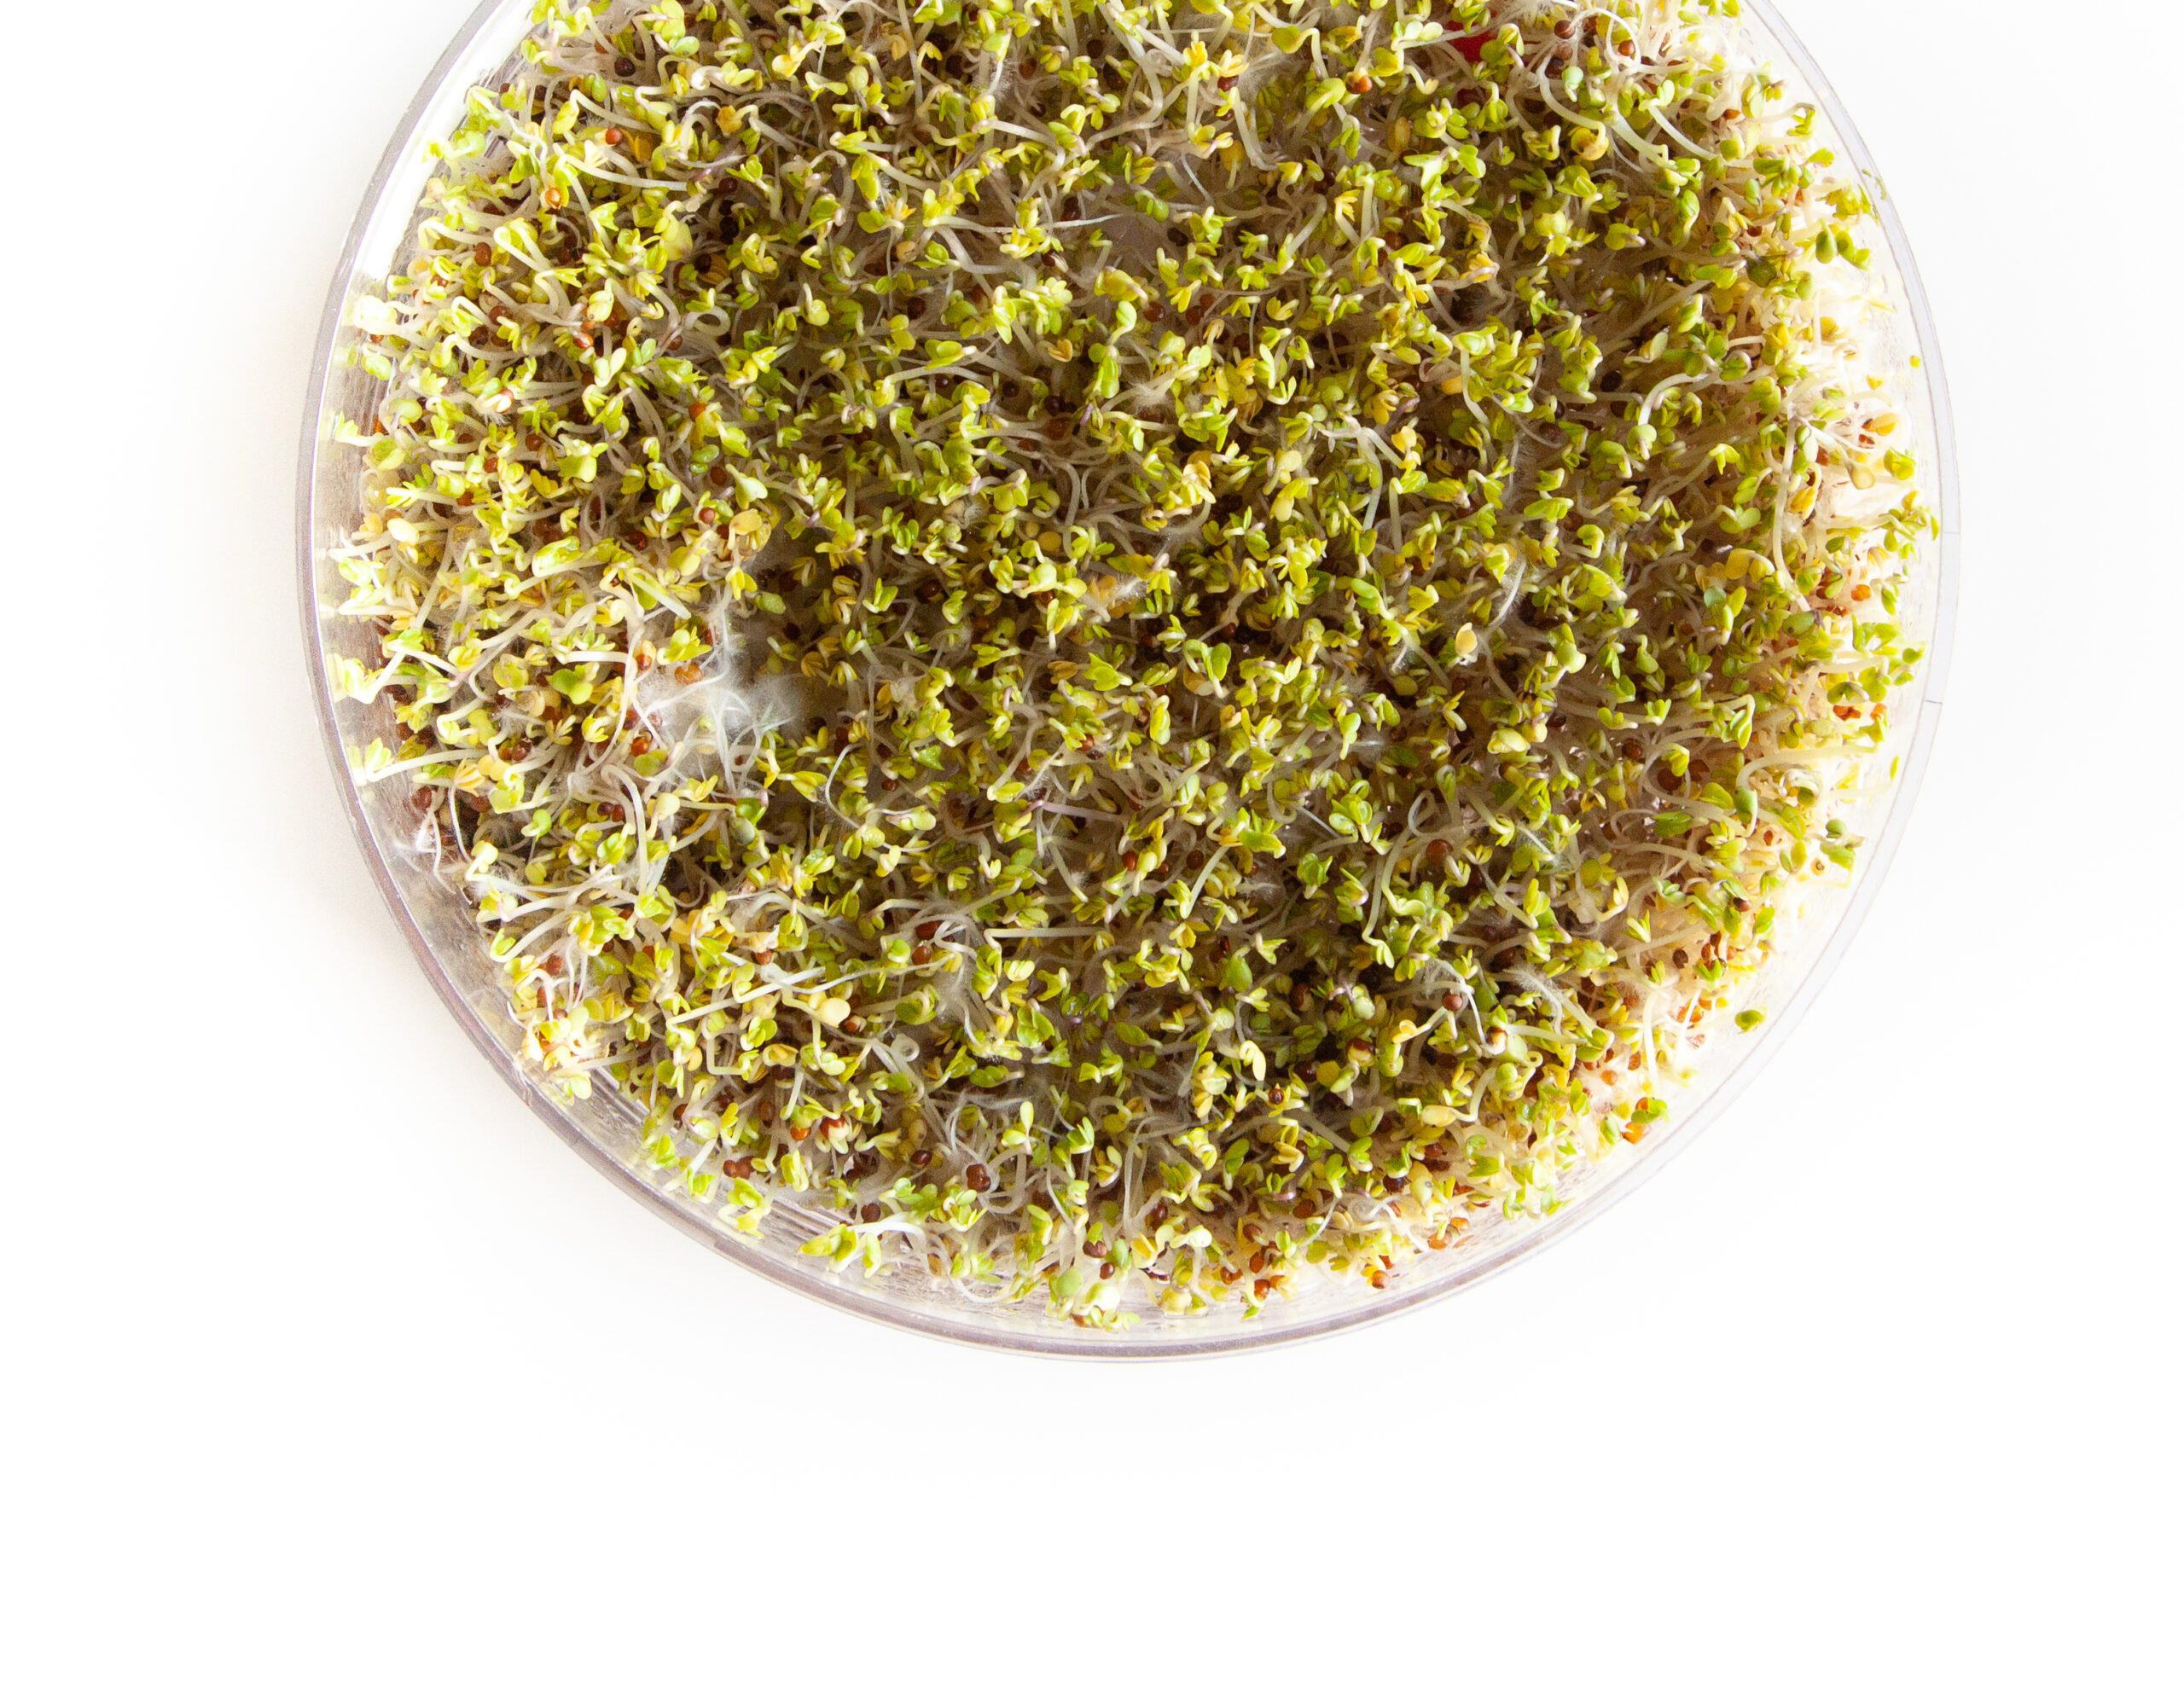 Sprouting at Home Safely: A tray of broccoli sprouts showing the fuzzy roots normal in brassica sprouts—it's not mould!